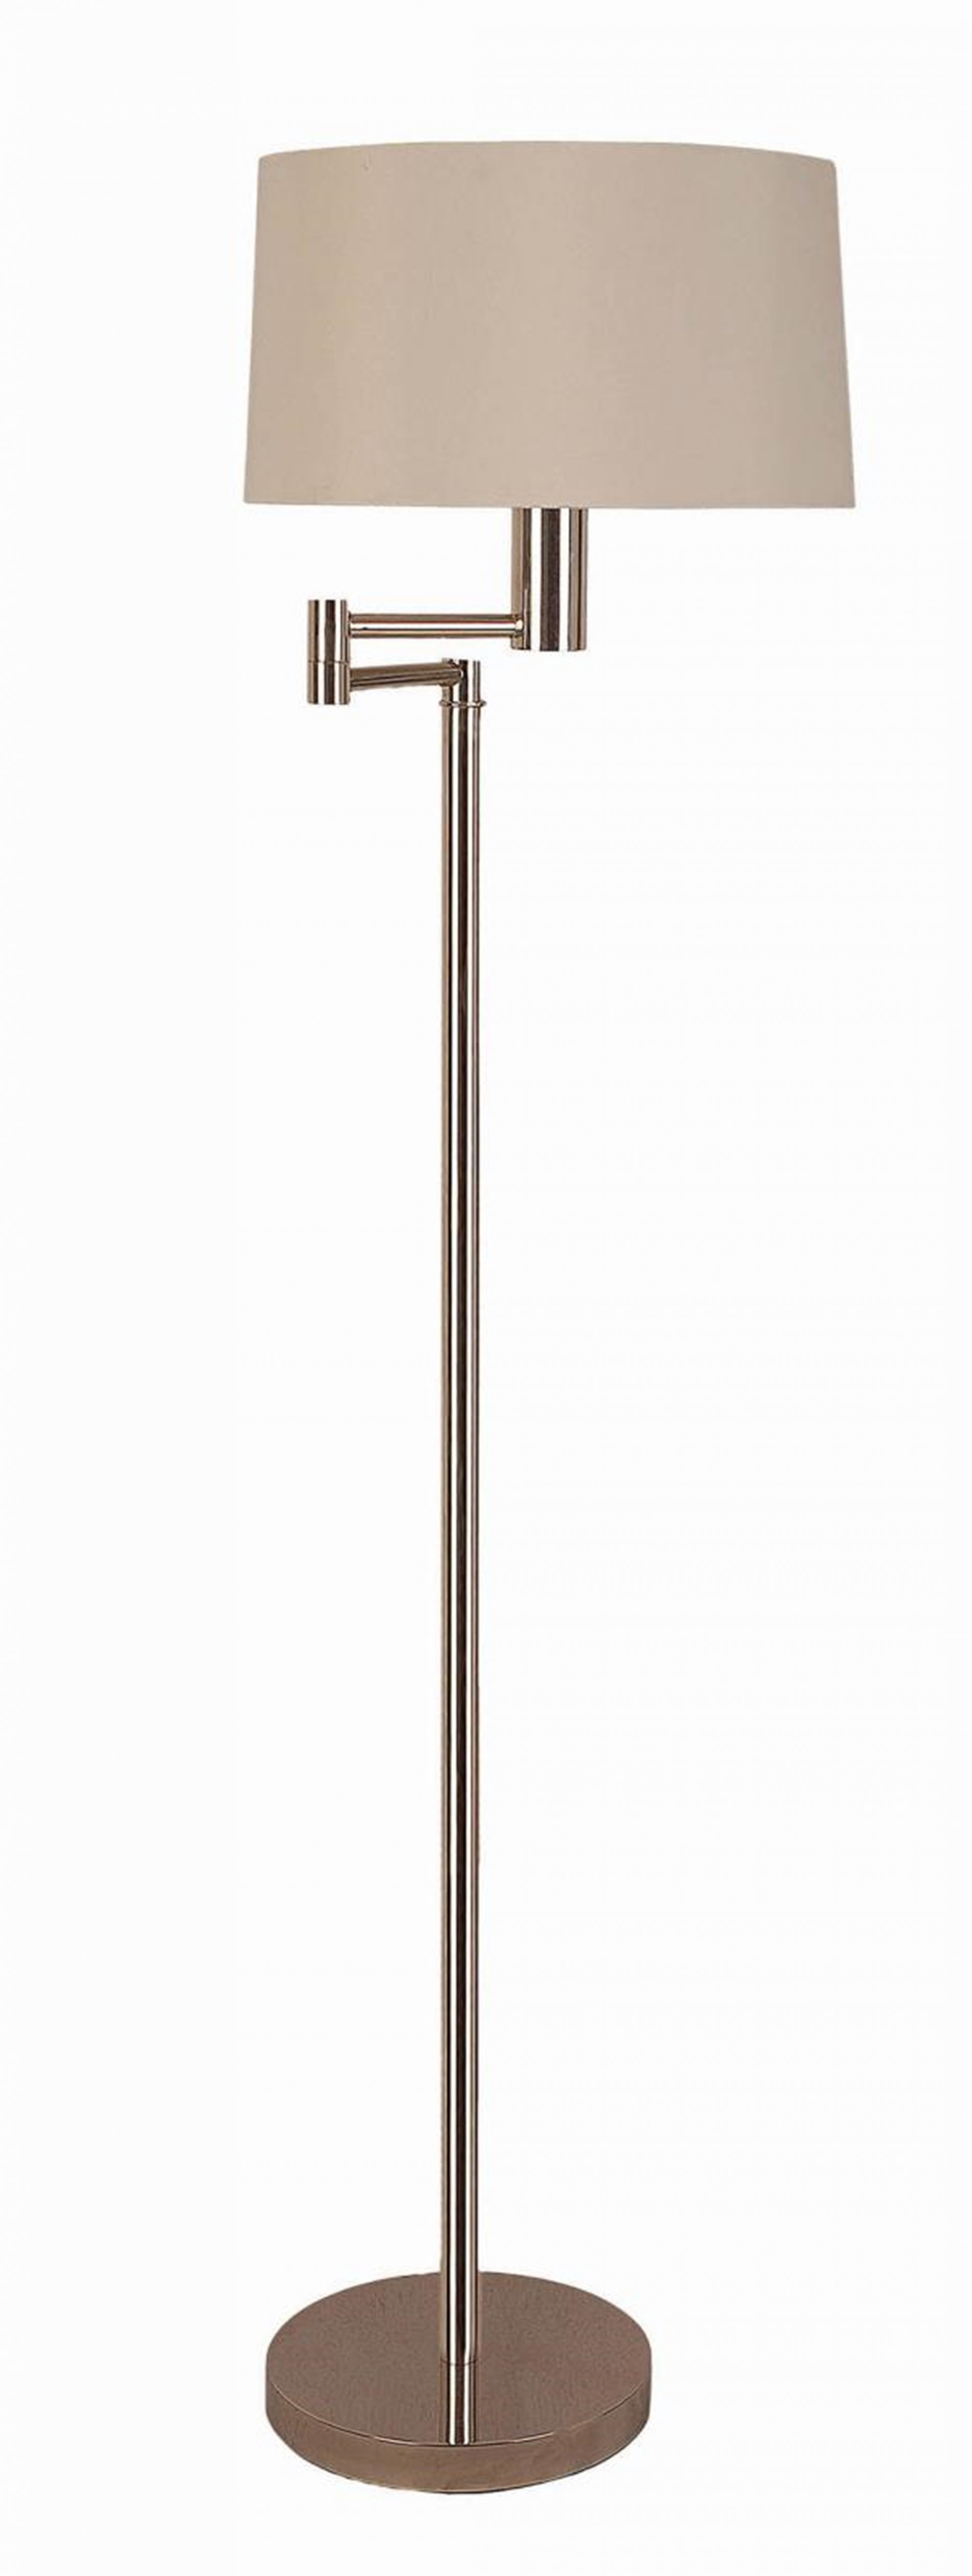 Transitional Polished Nickel Floor Lamp - Click Image to Close